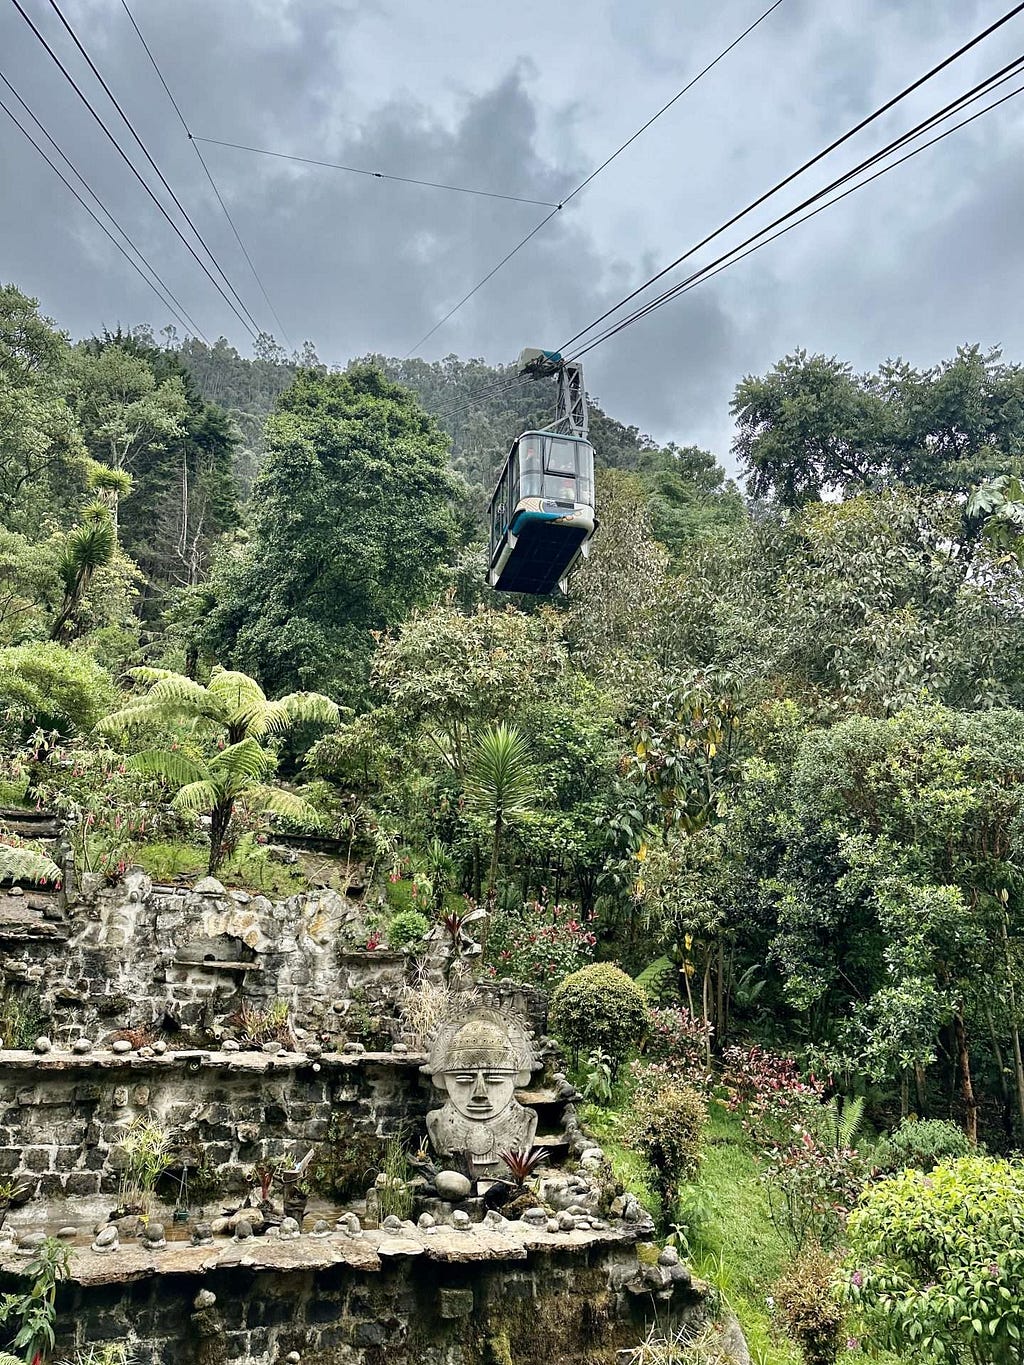 A cable car travels over a lush, green hillside with a stone terrace below featuring a carved face statue. Dark clouds loom overhead.